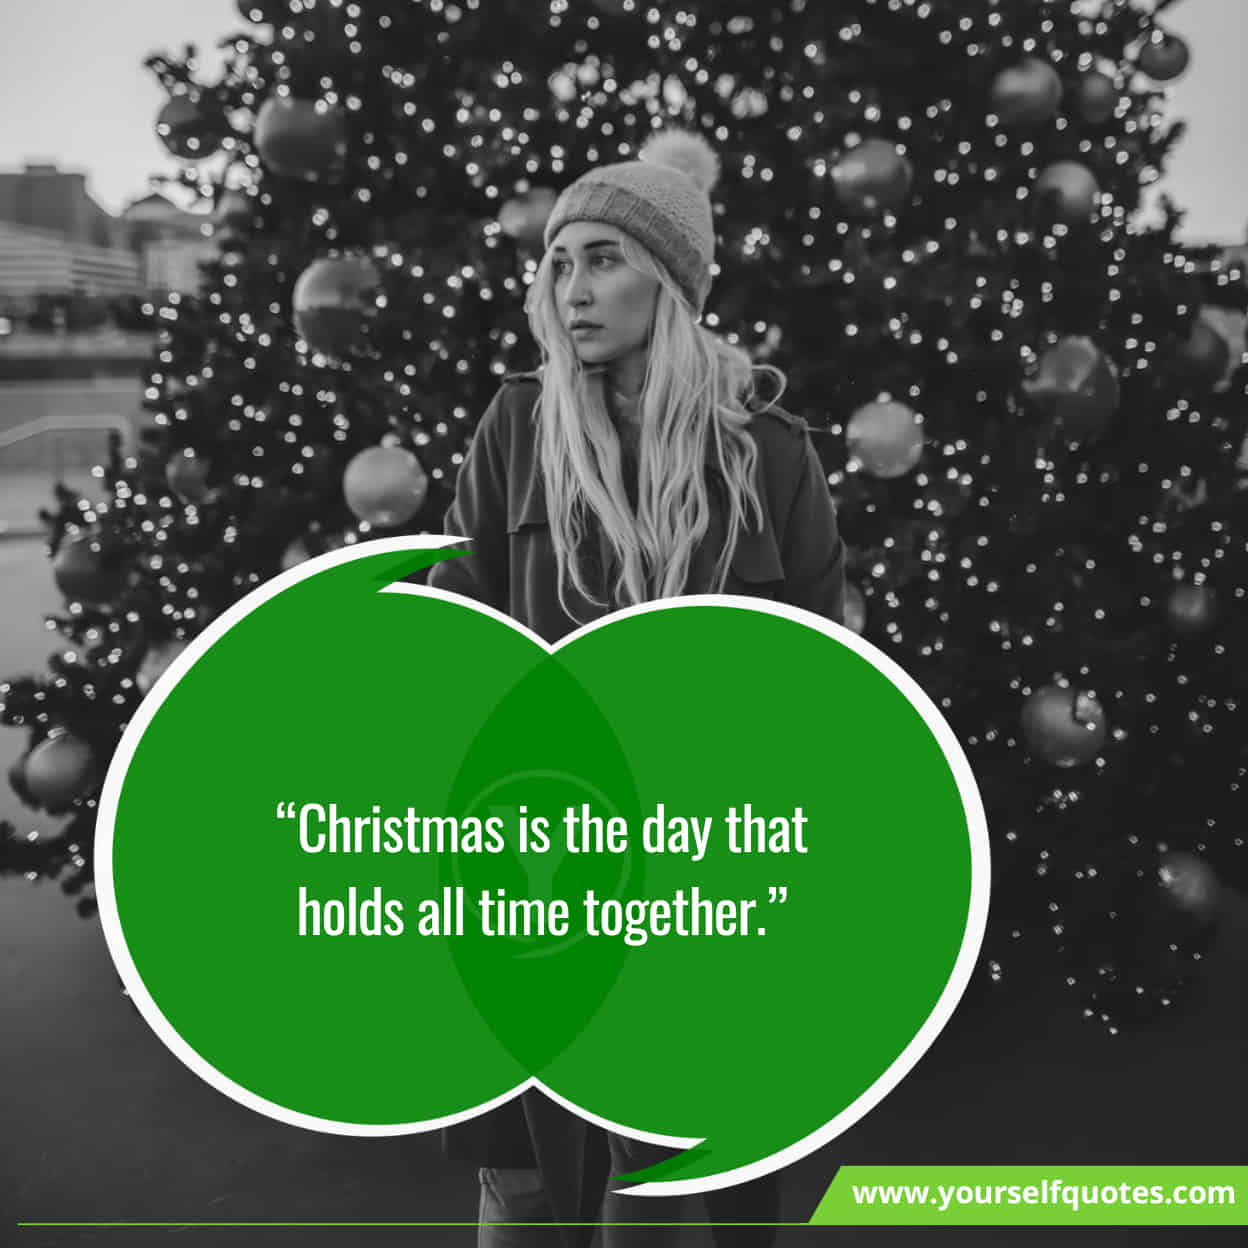 Christmas Quotes for Instagram